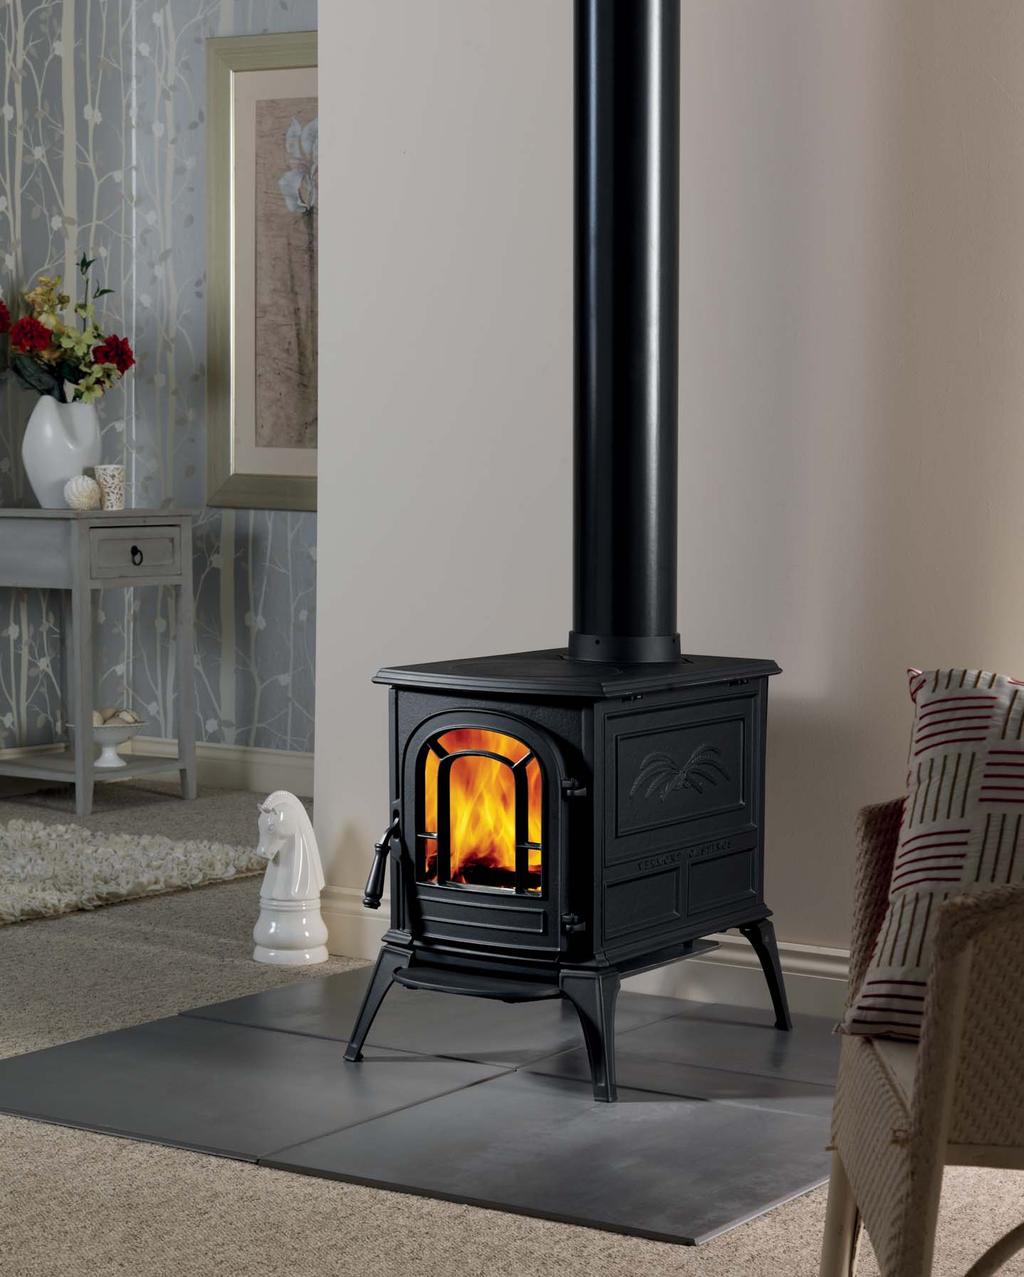 20 www.acrheatproducts.co.uk 21 TC CB IR ASPEN WOODBURNER Compact in size but with all the detailing and sophistication of our larger stoves.